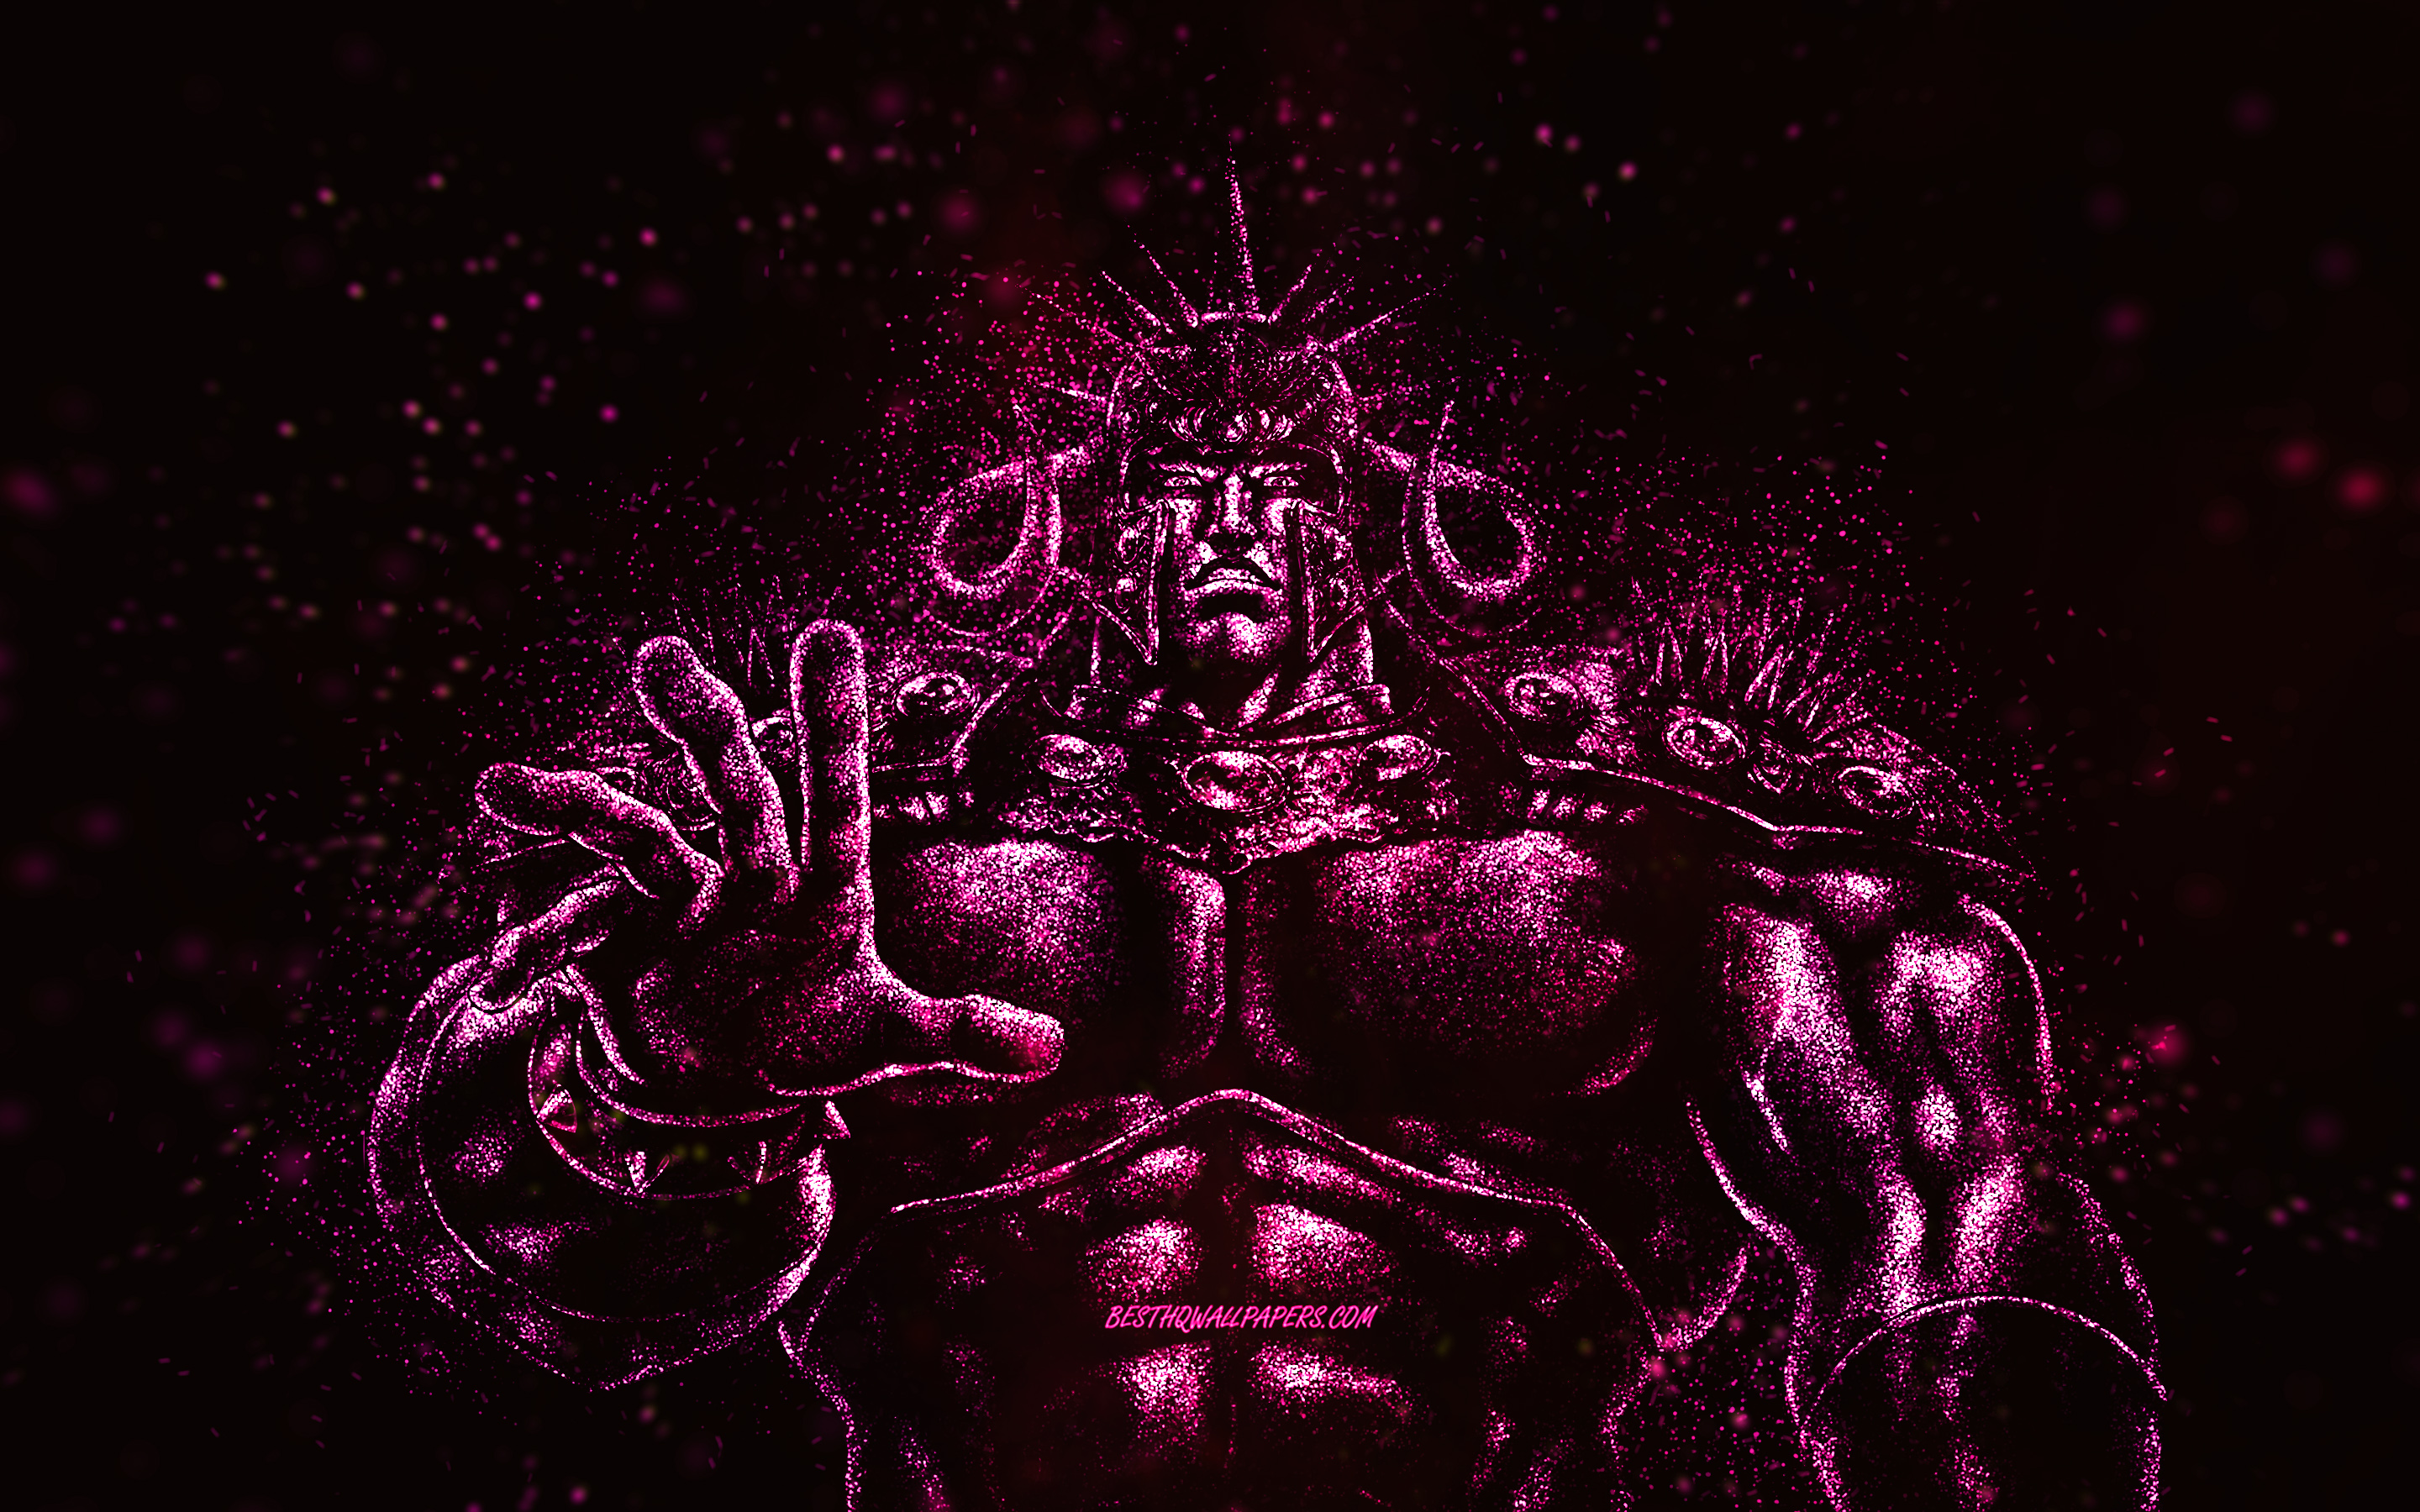 Download wallpaper Raoh, Hokuto Renkitoza, Fist of The North Star, King of Fists, Villains, purple glitter art, black background, Villains characters, Raoh character, Fist of the North Star characters for desktop with